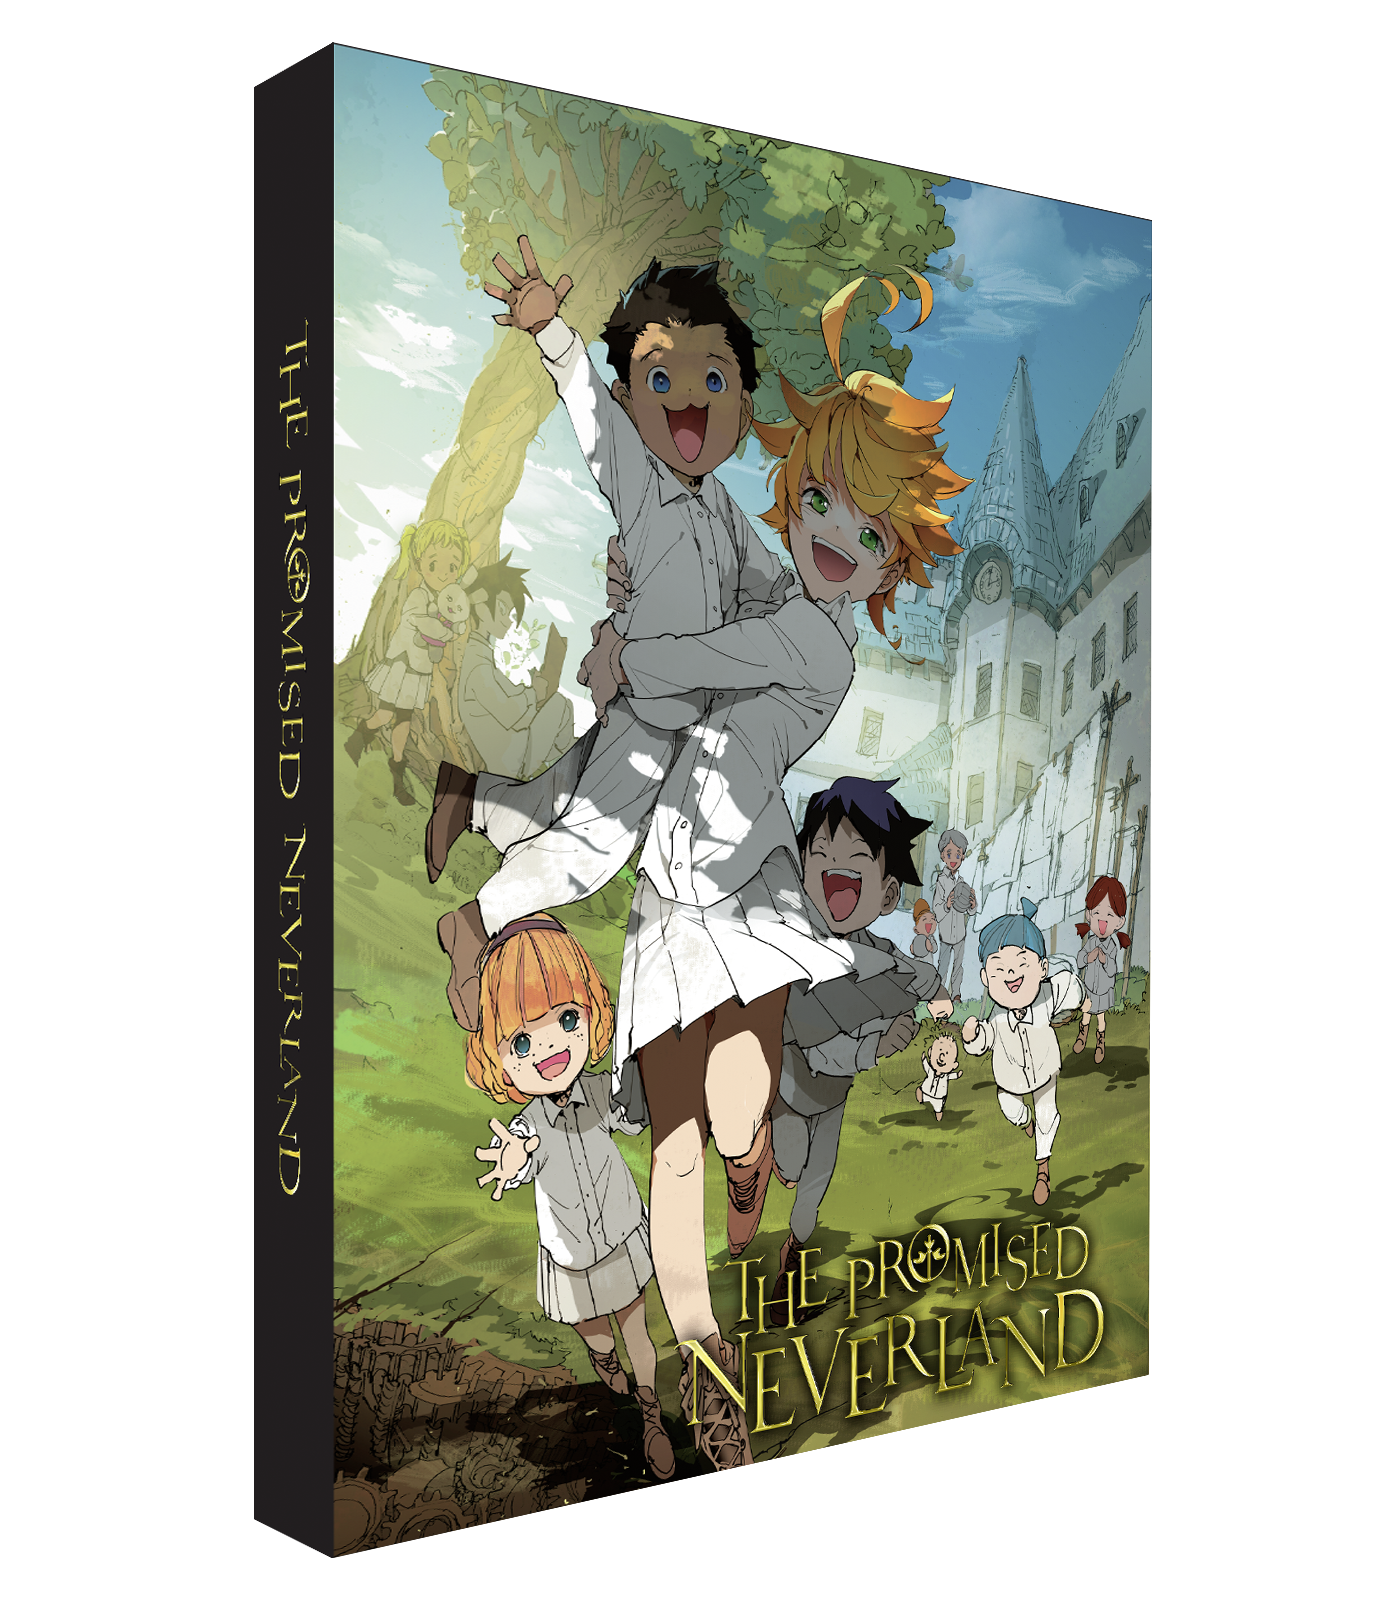 ANI0569_slipcase_front_Promised_Neverland.png